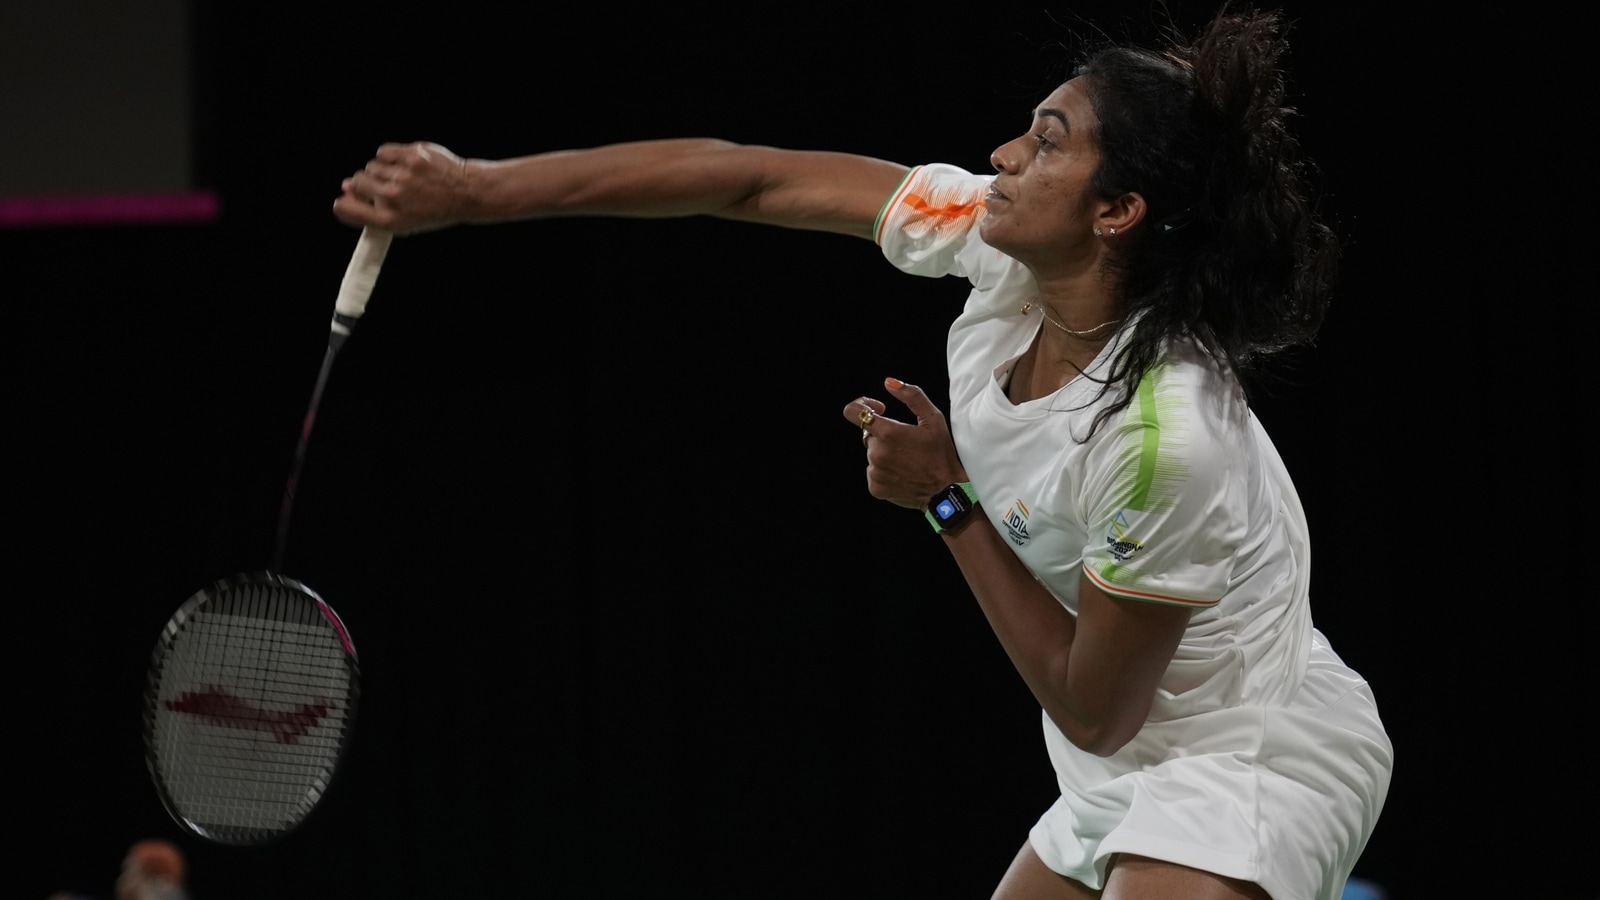 CWG 2022 India beat Singapore to reach final of mixed team badminton